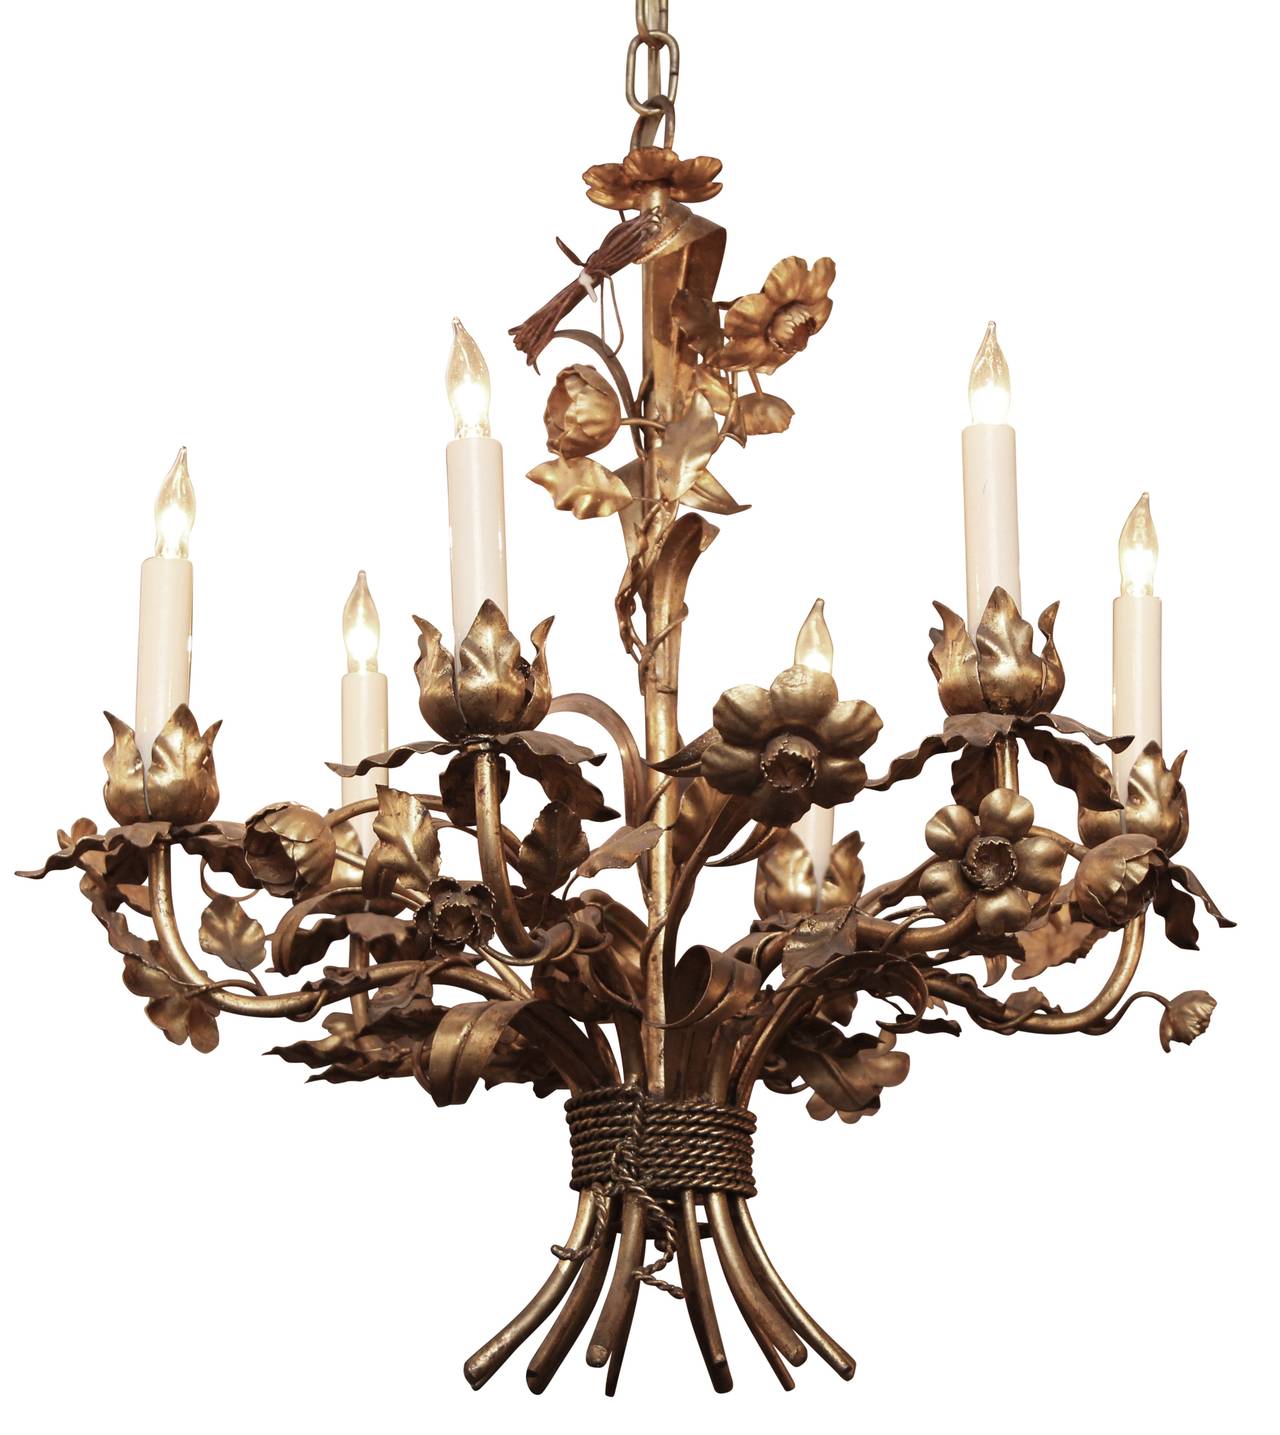 Floral chandelier made of gilt metal. Seen in a wheat and floral motif, it has rope detailing at the bottom and six lights. Made in Italy in the 1950s. This item can be viewed at our 302 Bowery locations in Manhattan.